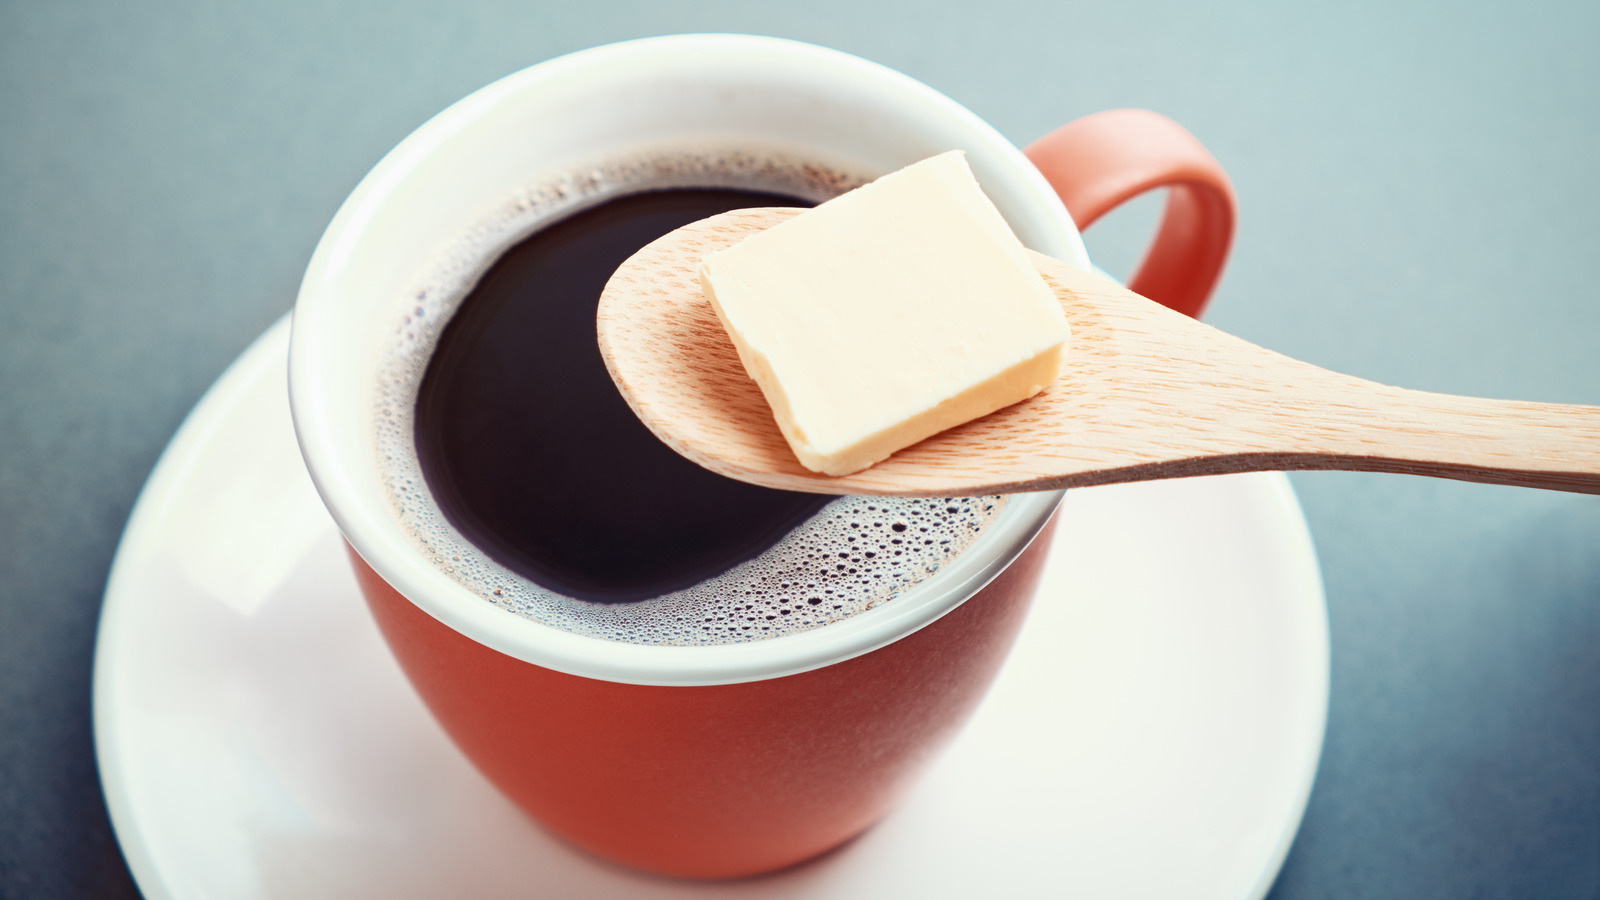 What Exactly Is Butter Coffee And What Does It Taste Like?